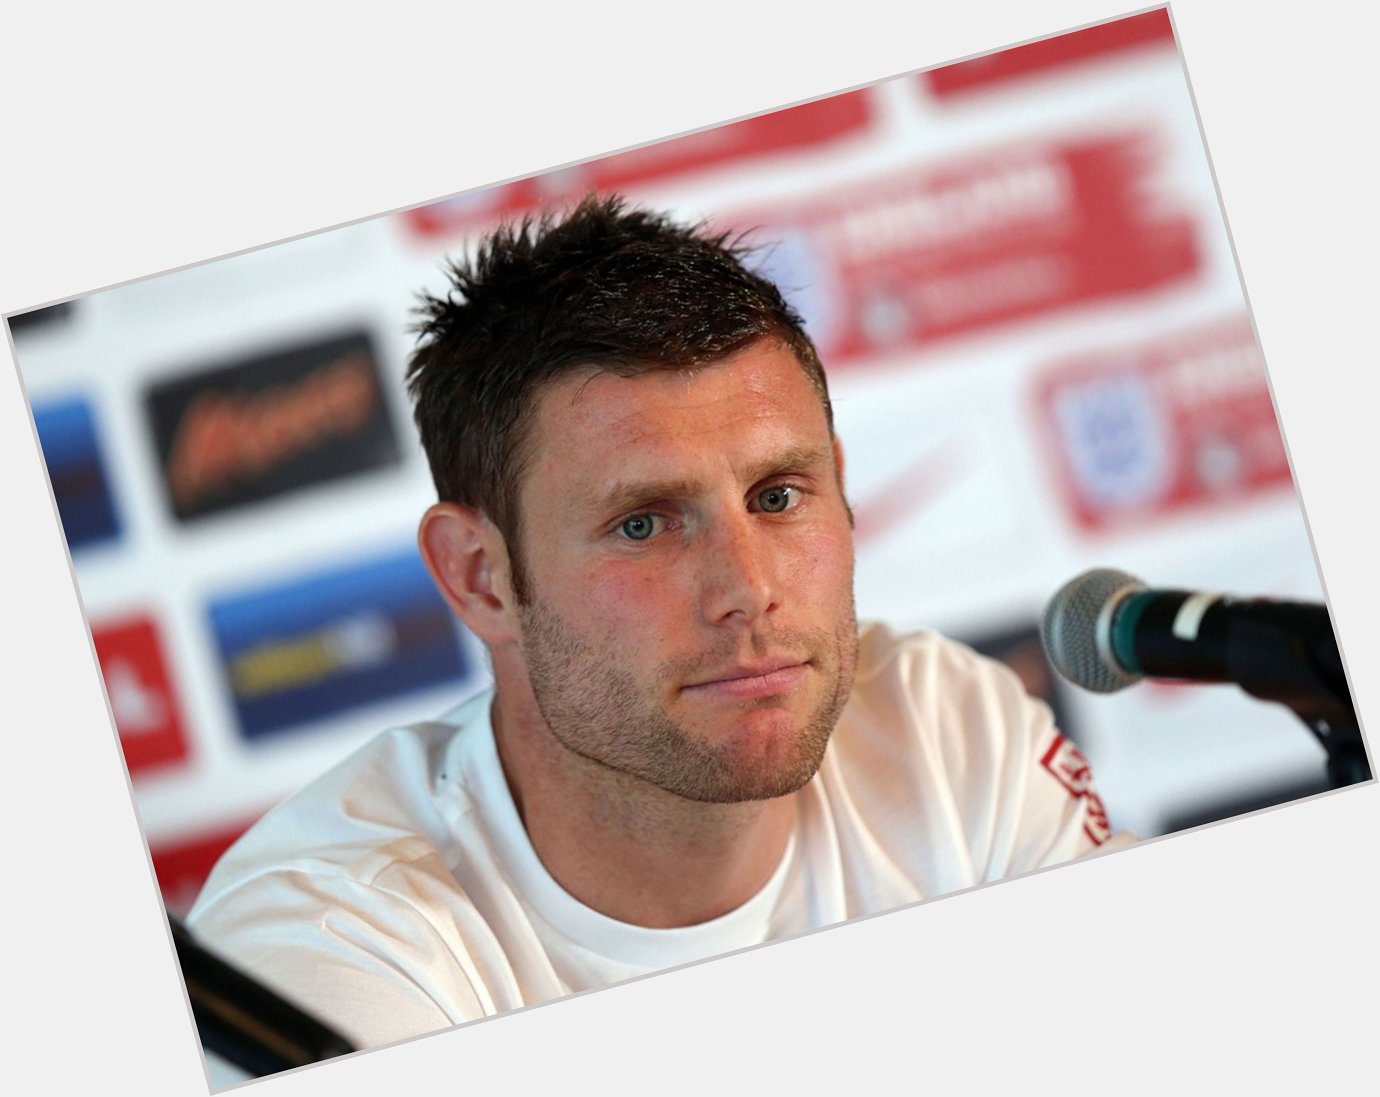 Happy birthday to Manchester City\s James Milner. The most boring footballer in the world turns 29 today. 